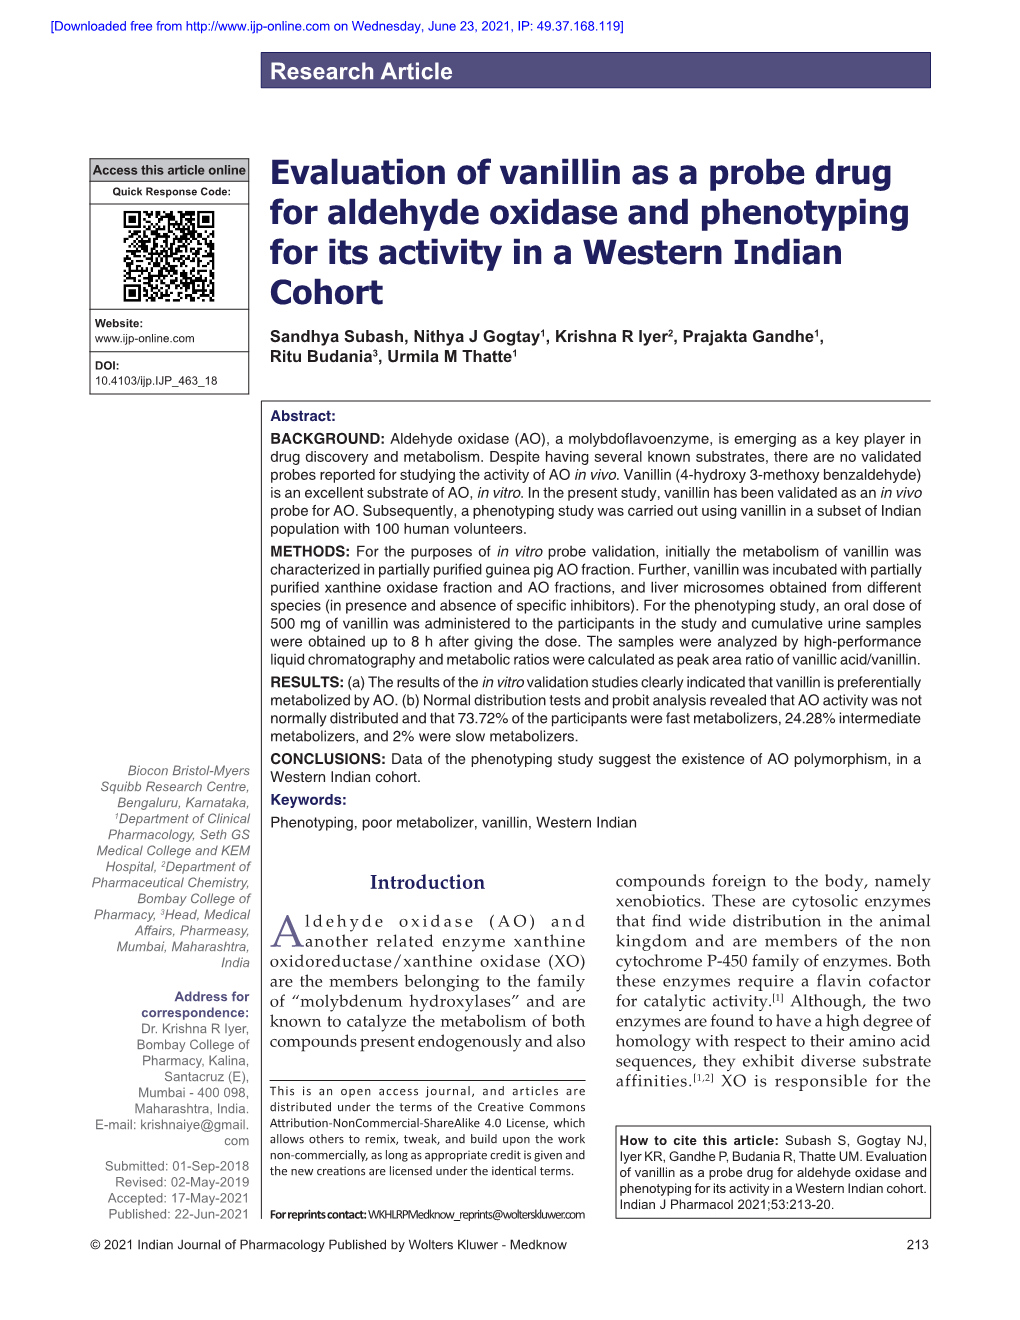 Evaluation of Vanillin As a Probe Drug for Aldehyde Oxidase and Phenotyping for Its Activity in a Western Indian Cohort